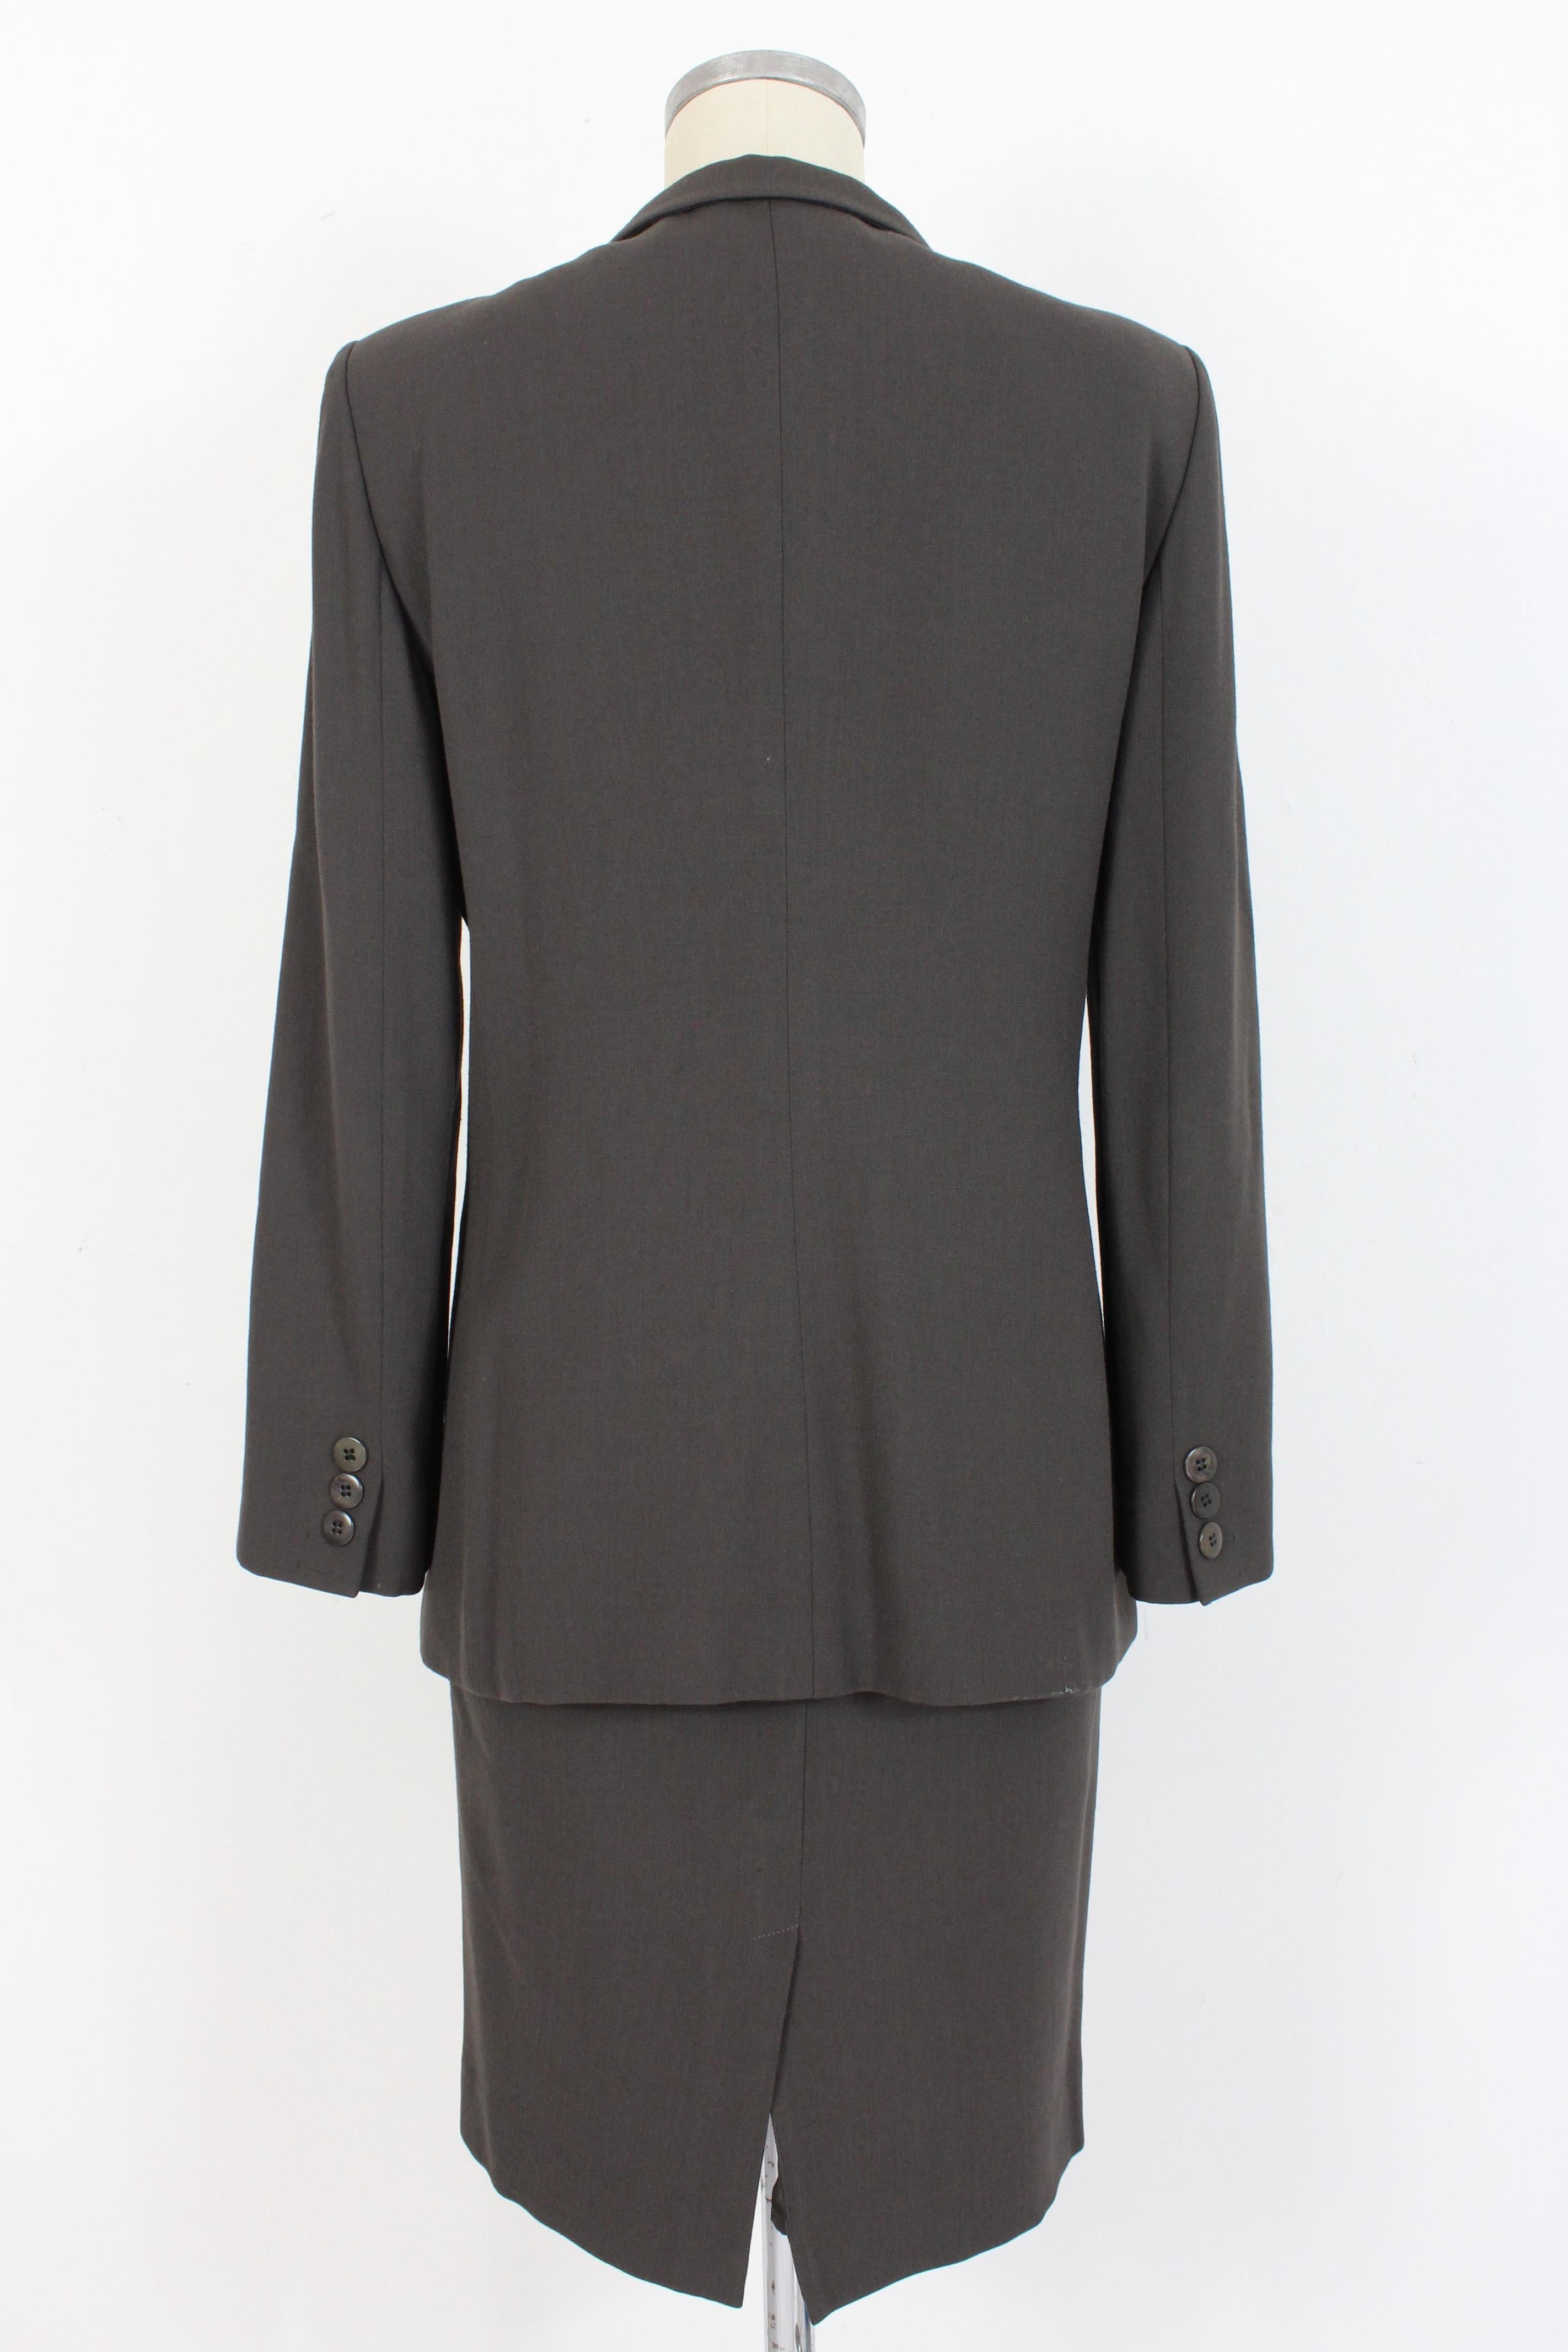 Armani Collezioni 90s vintage women's suit skirt. Classic dark gray suit. Lined jacket with applied shoulder pads, pencil skirt. The skirt and jacket have different sizes, read the measurements well. Made in Italy.

Condition: Excellent

Article